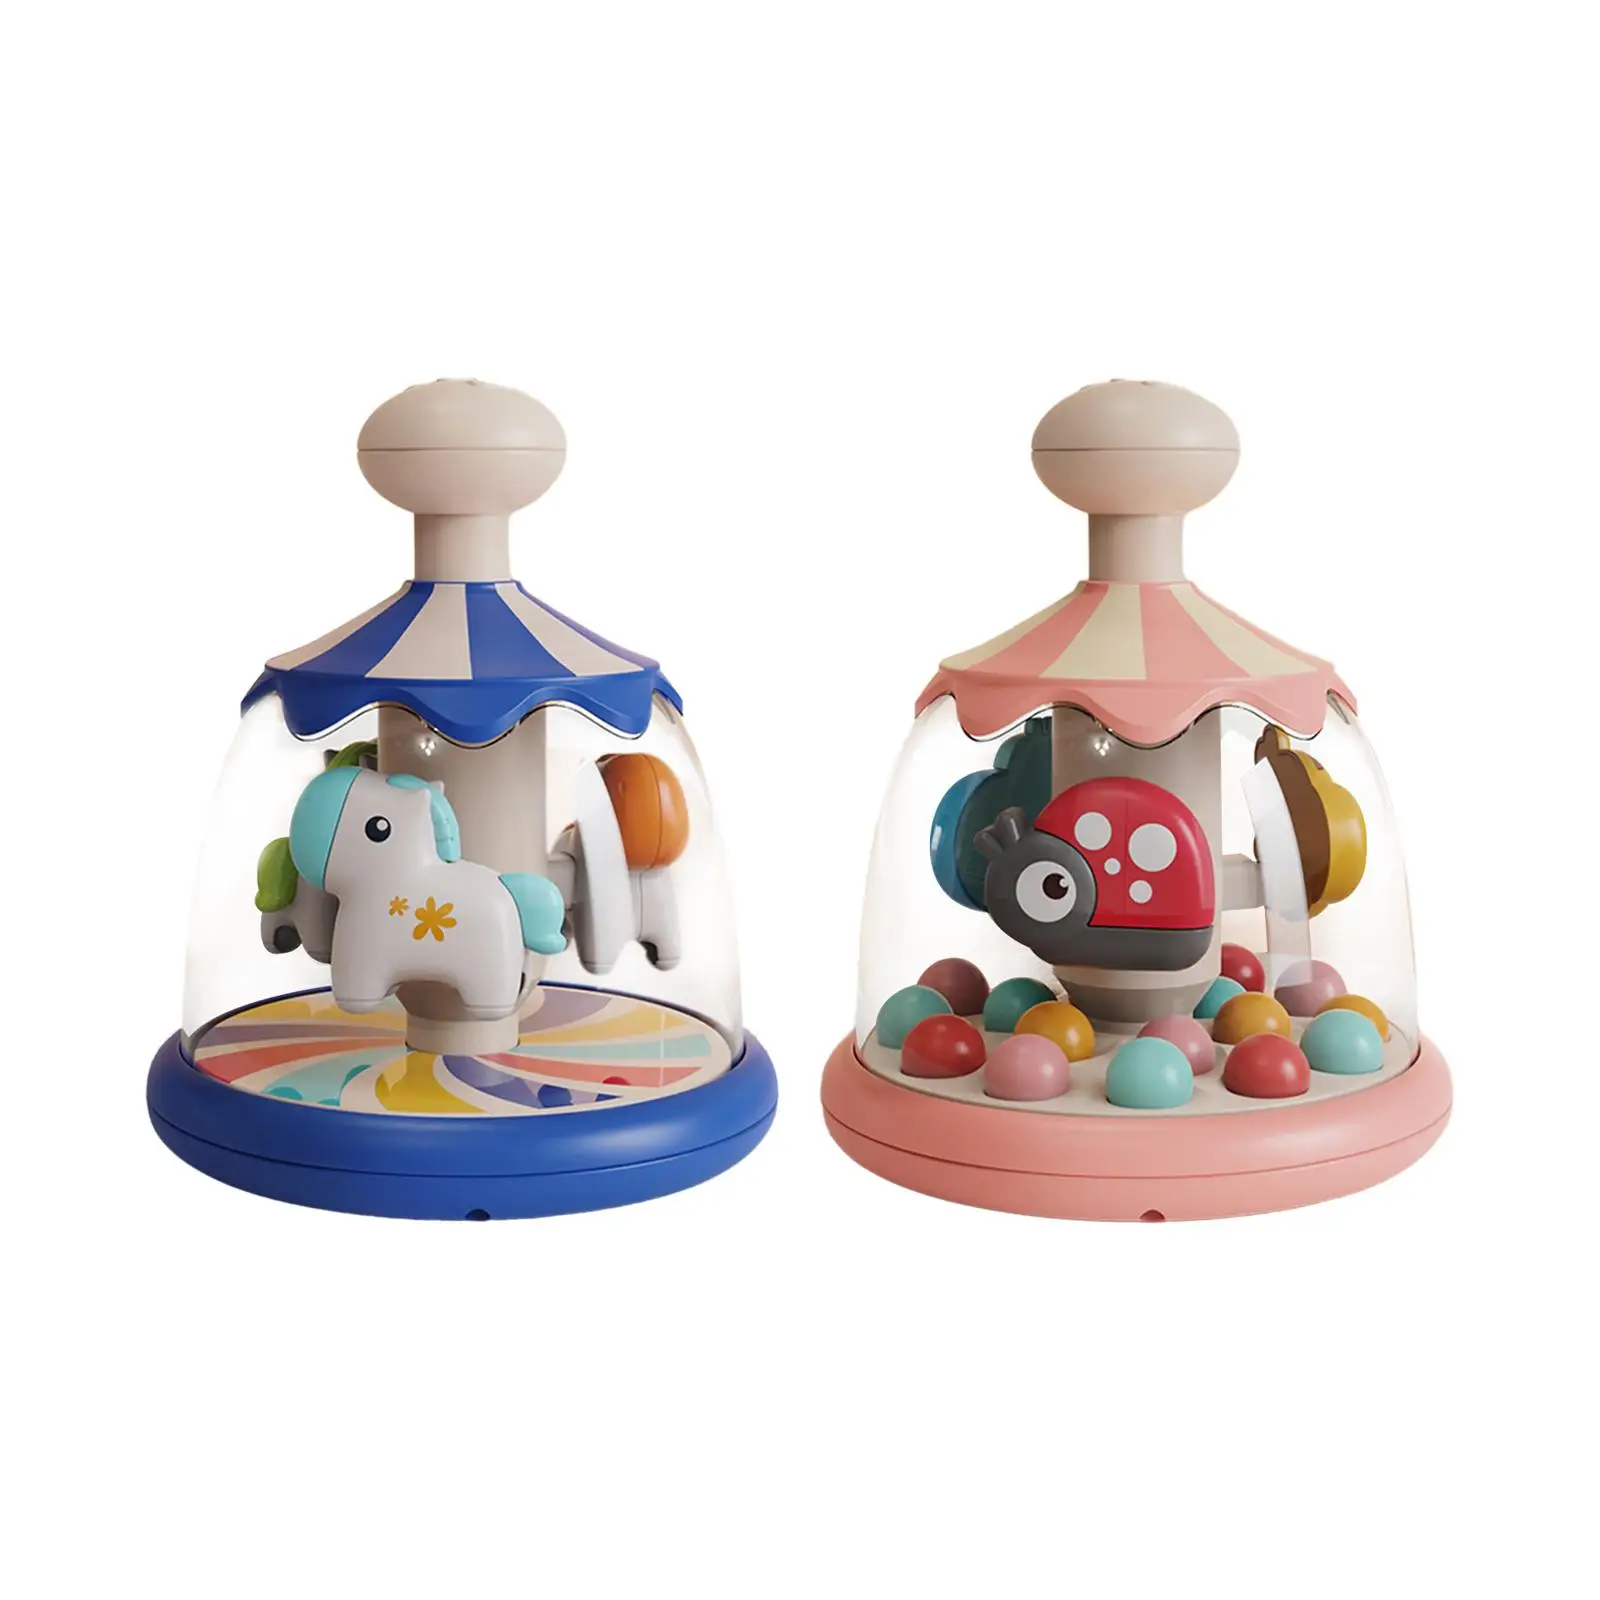 Baby Press Carousel Toy Brain Teaser Montessori Learning Toys for 6-12 Months Children